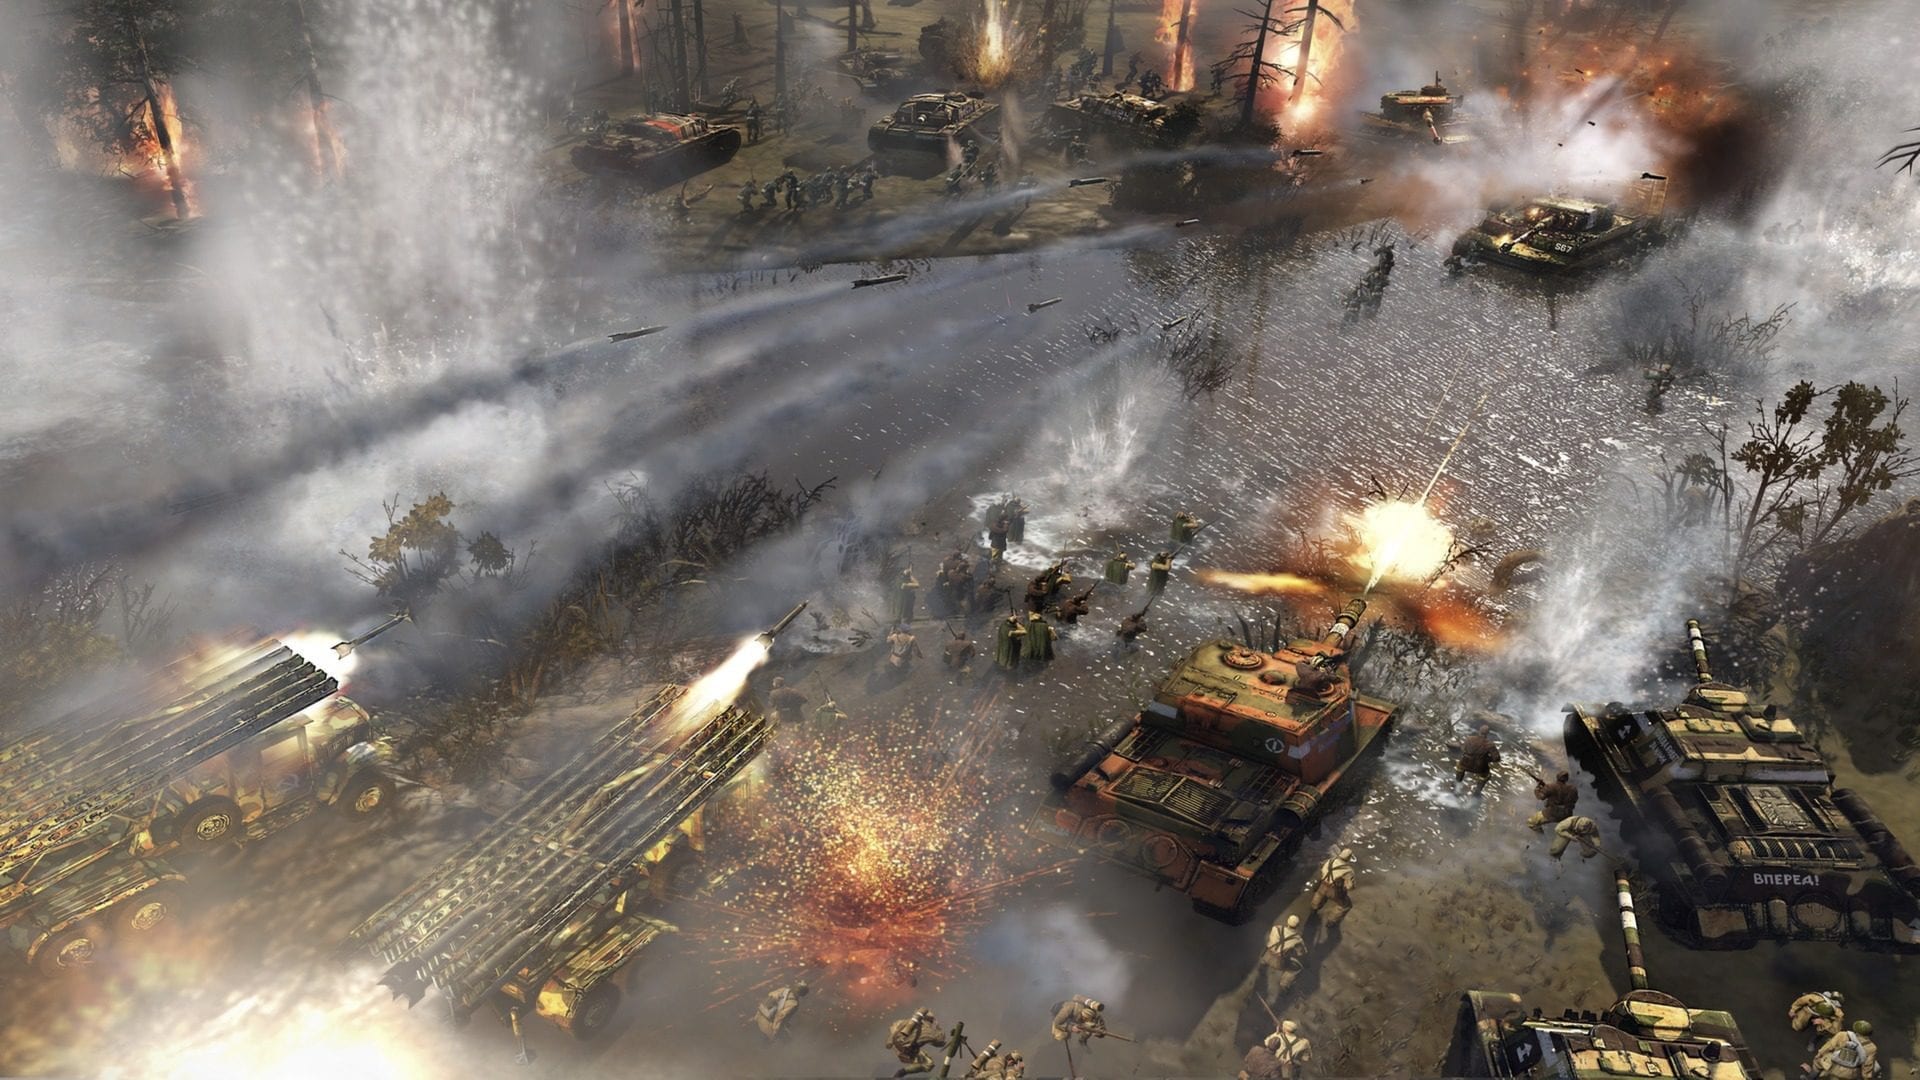 company of heroes 2 steam